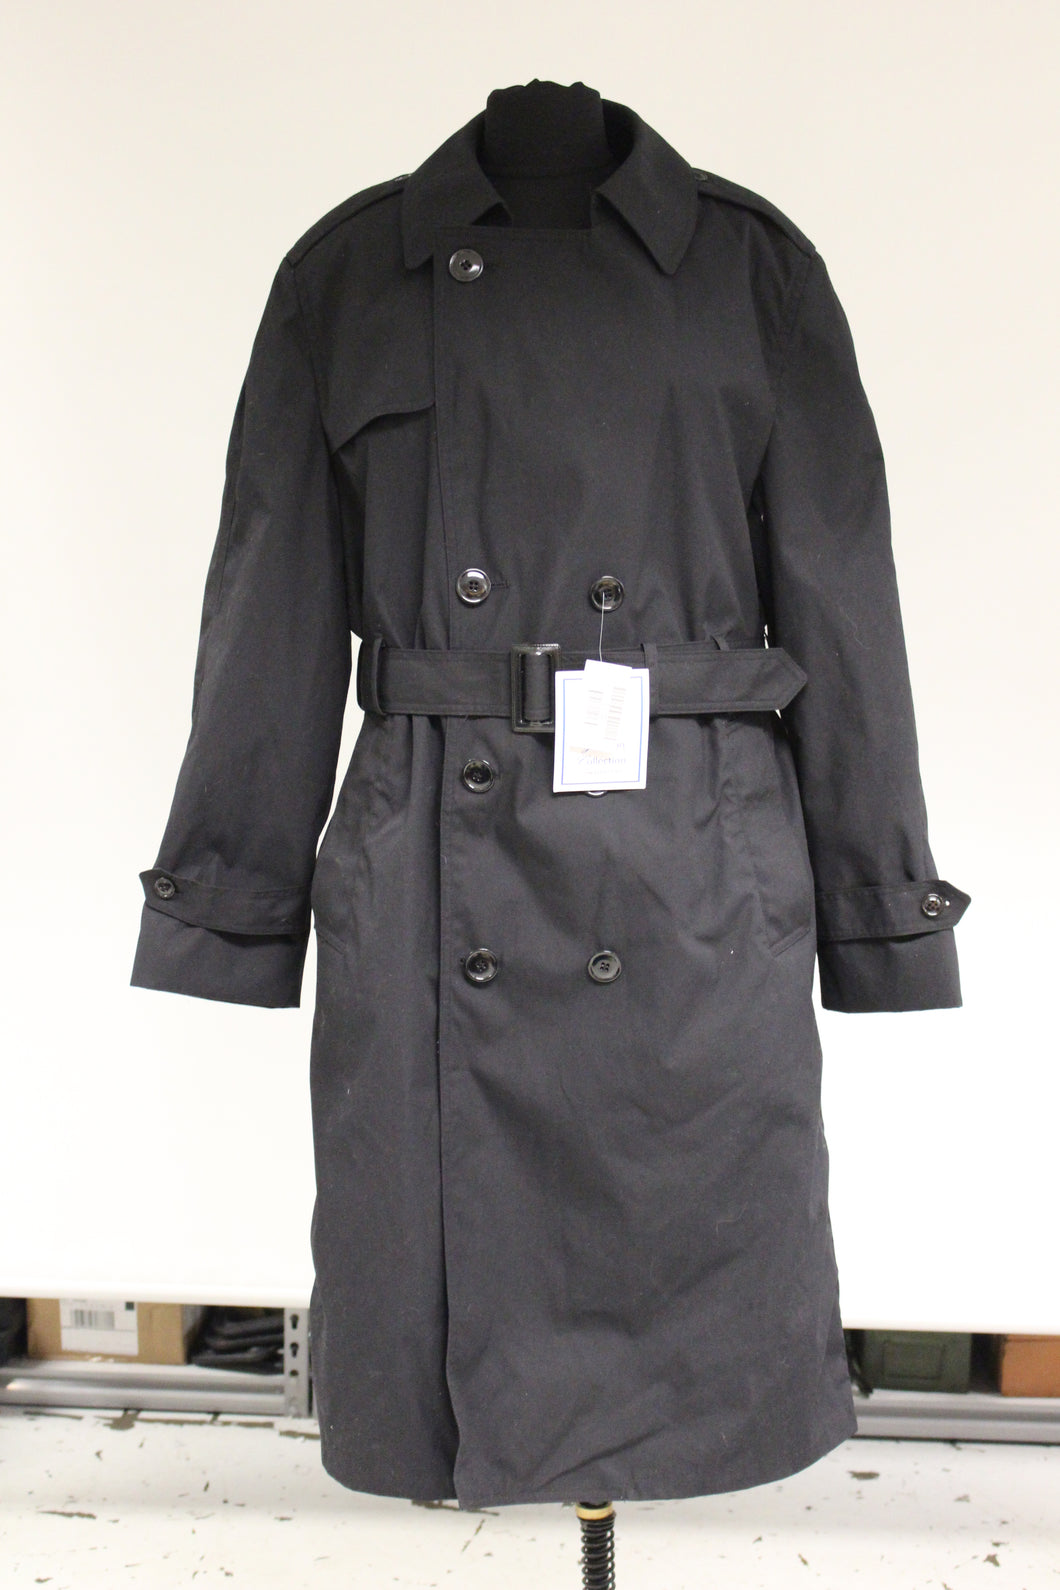 US Army Women's All Weather Trench Coat - Black - 12L - 8410-01-308-8660 - New